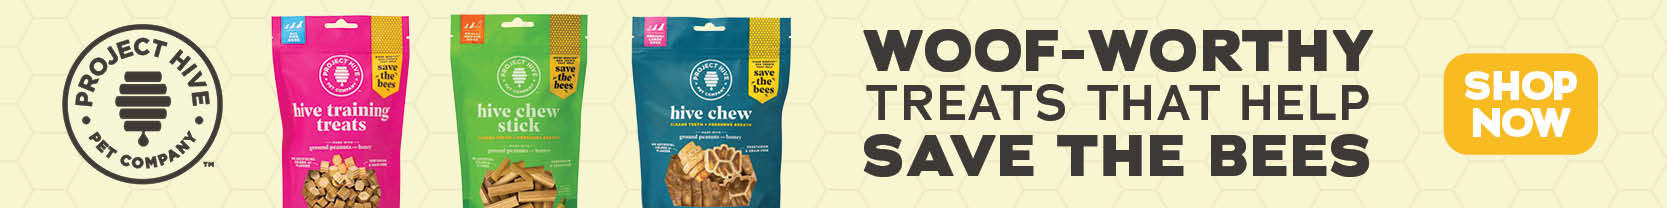 Project hive pet company - woof-worthy treats that help save the bees